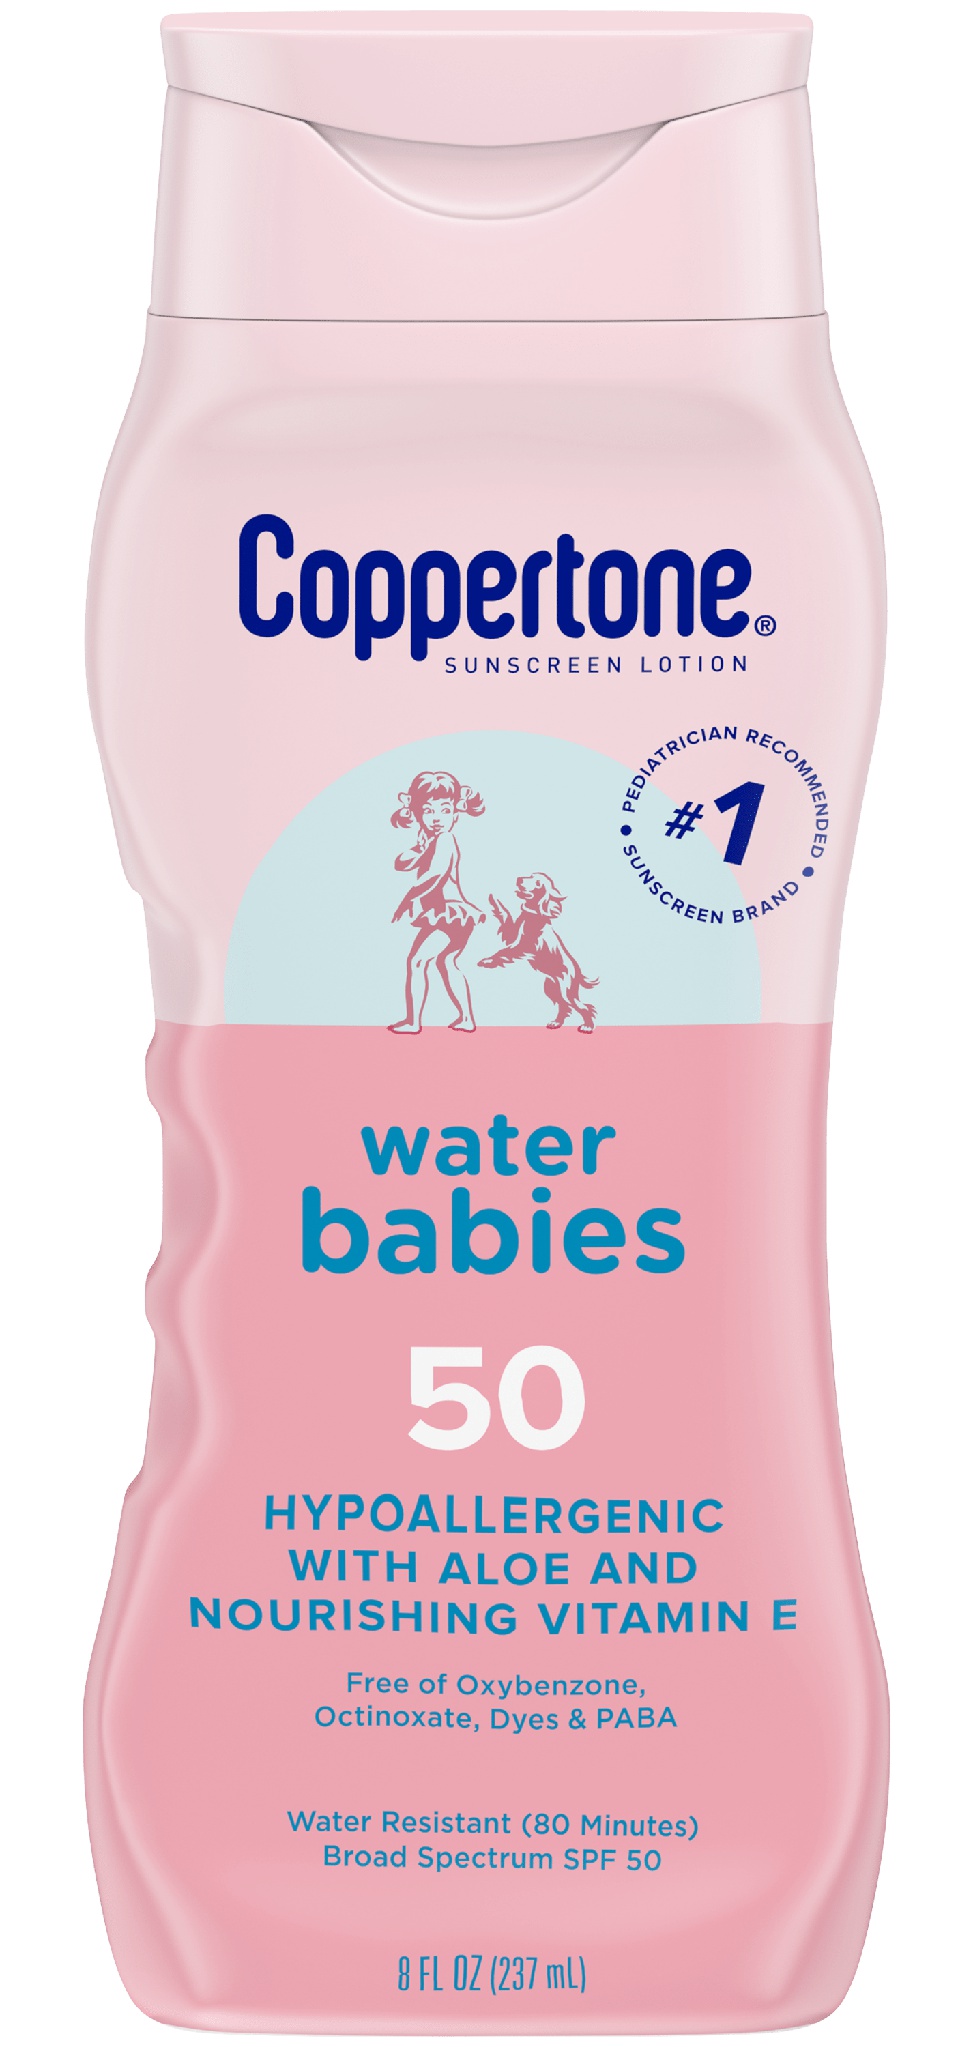 Coppertone Water Babies SPF 50 Sunscreen Lotion